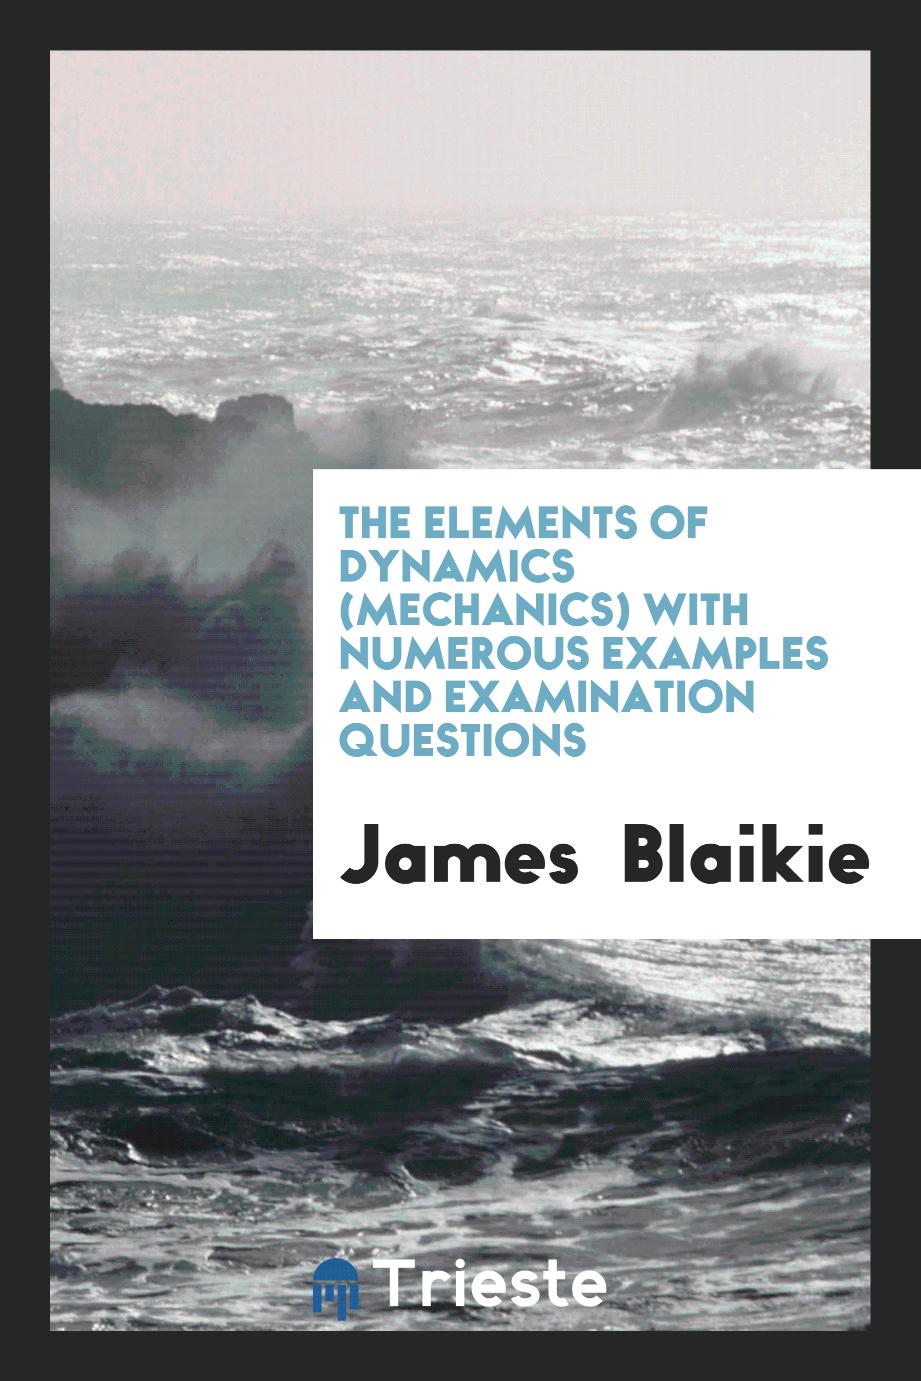 The elements of dynamics (mechanics) with numerous examples and examination questions